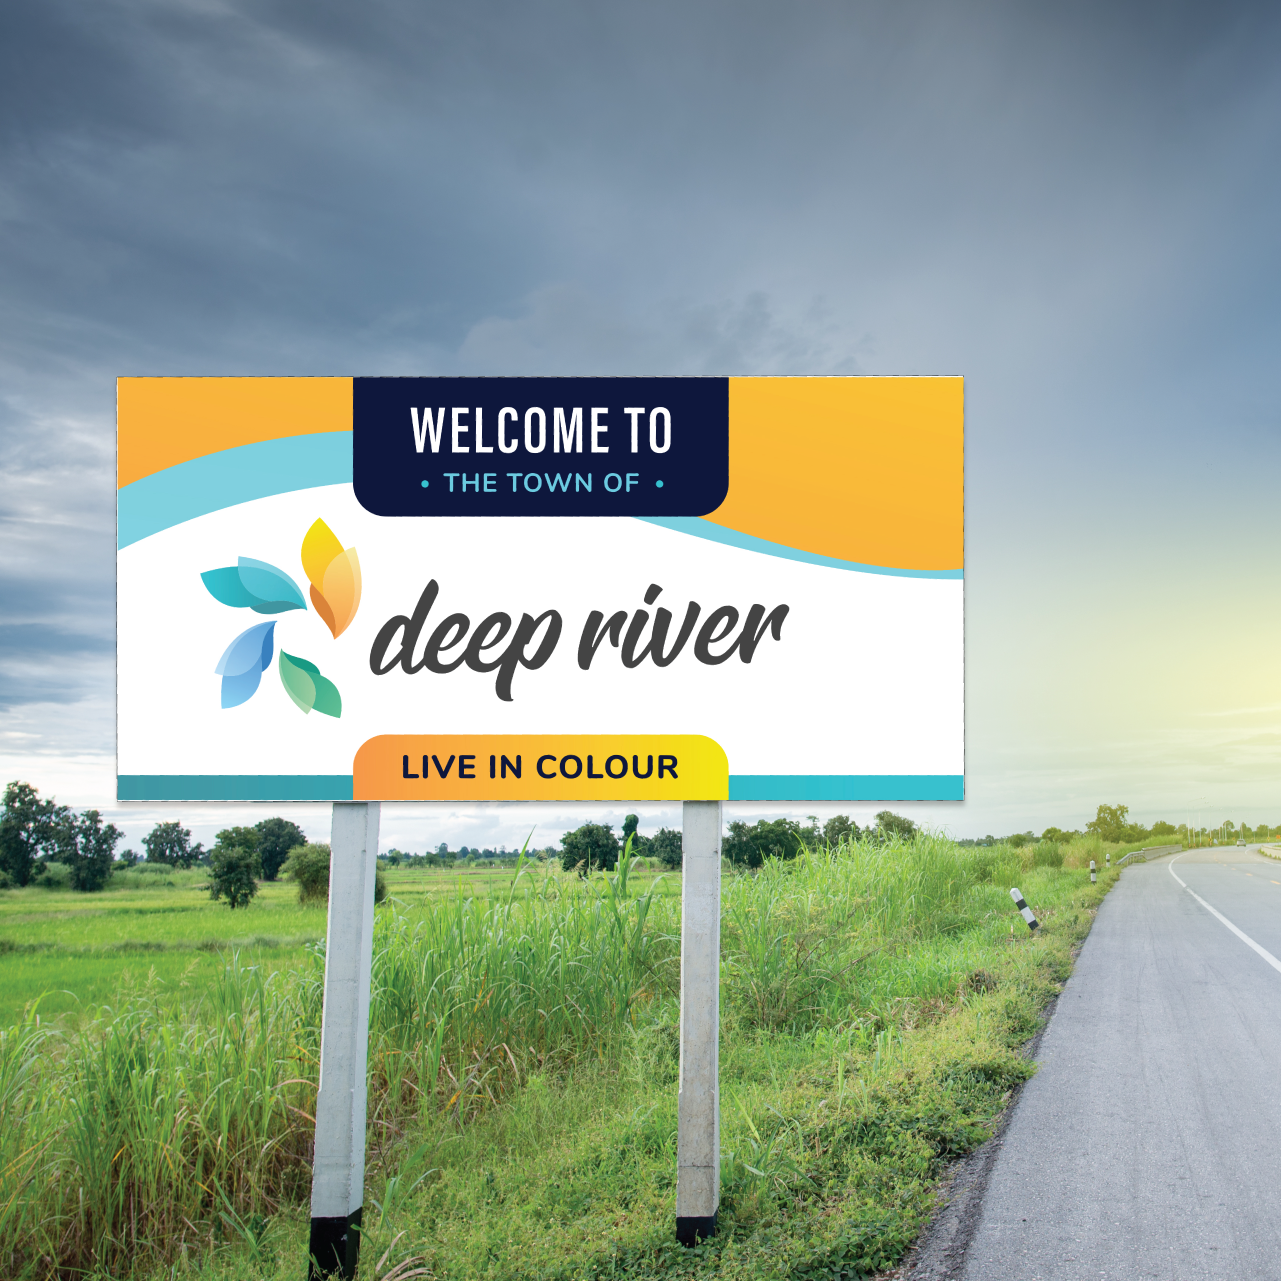 Welcome to deep river street sign